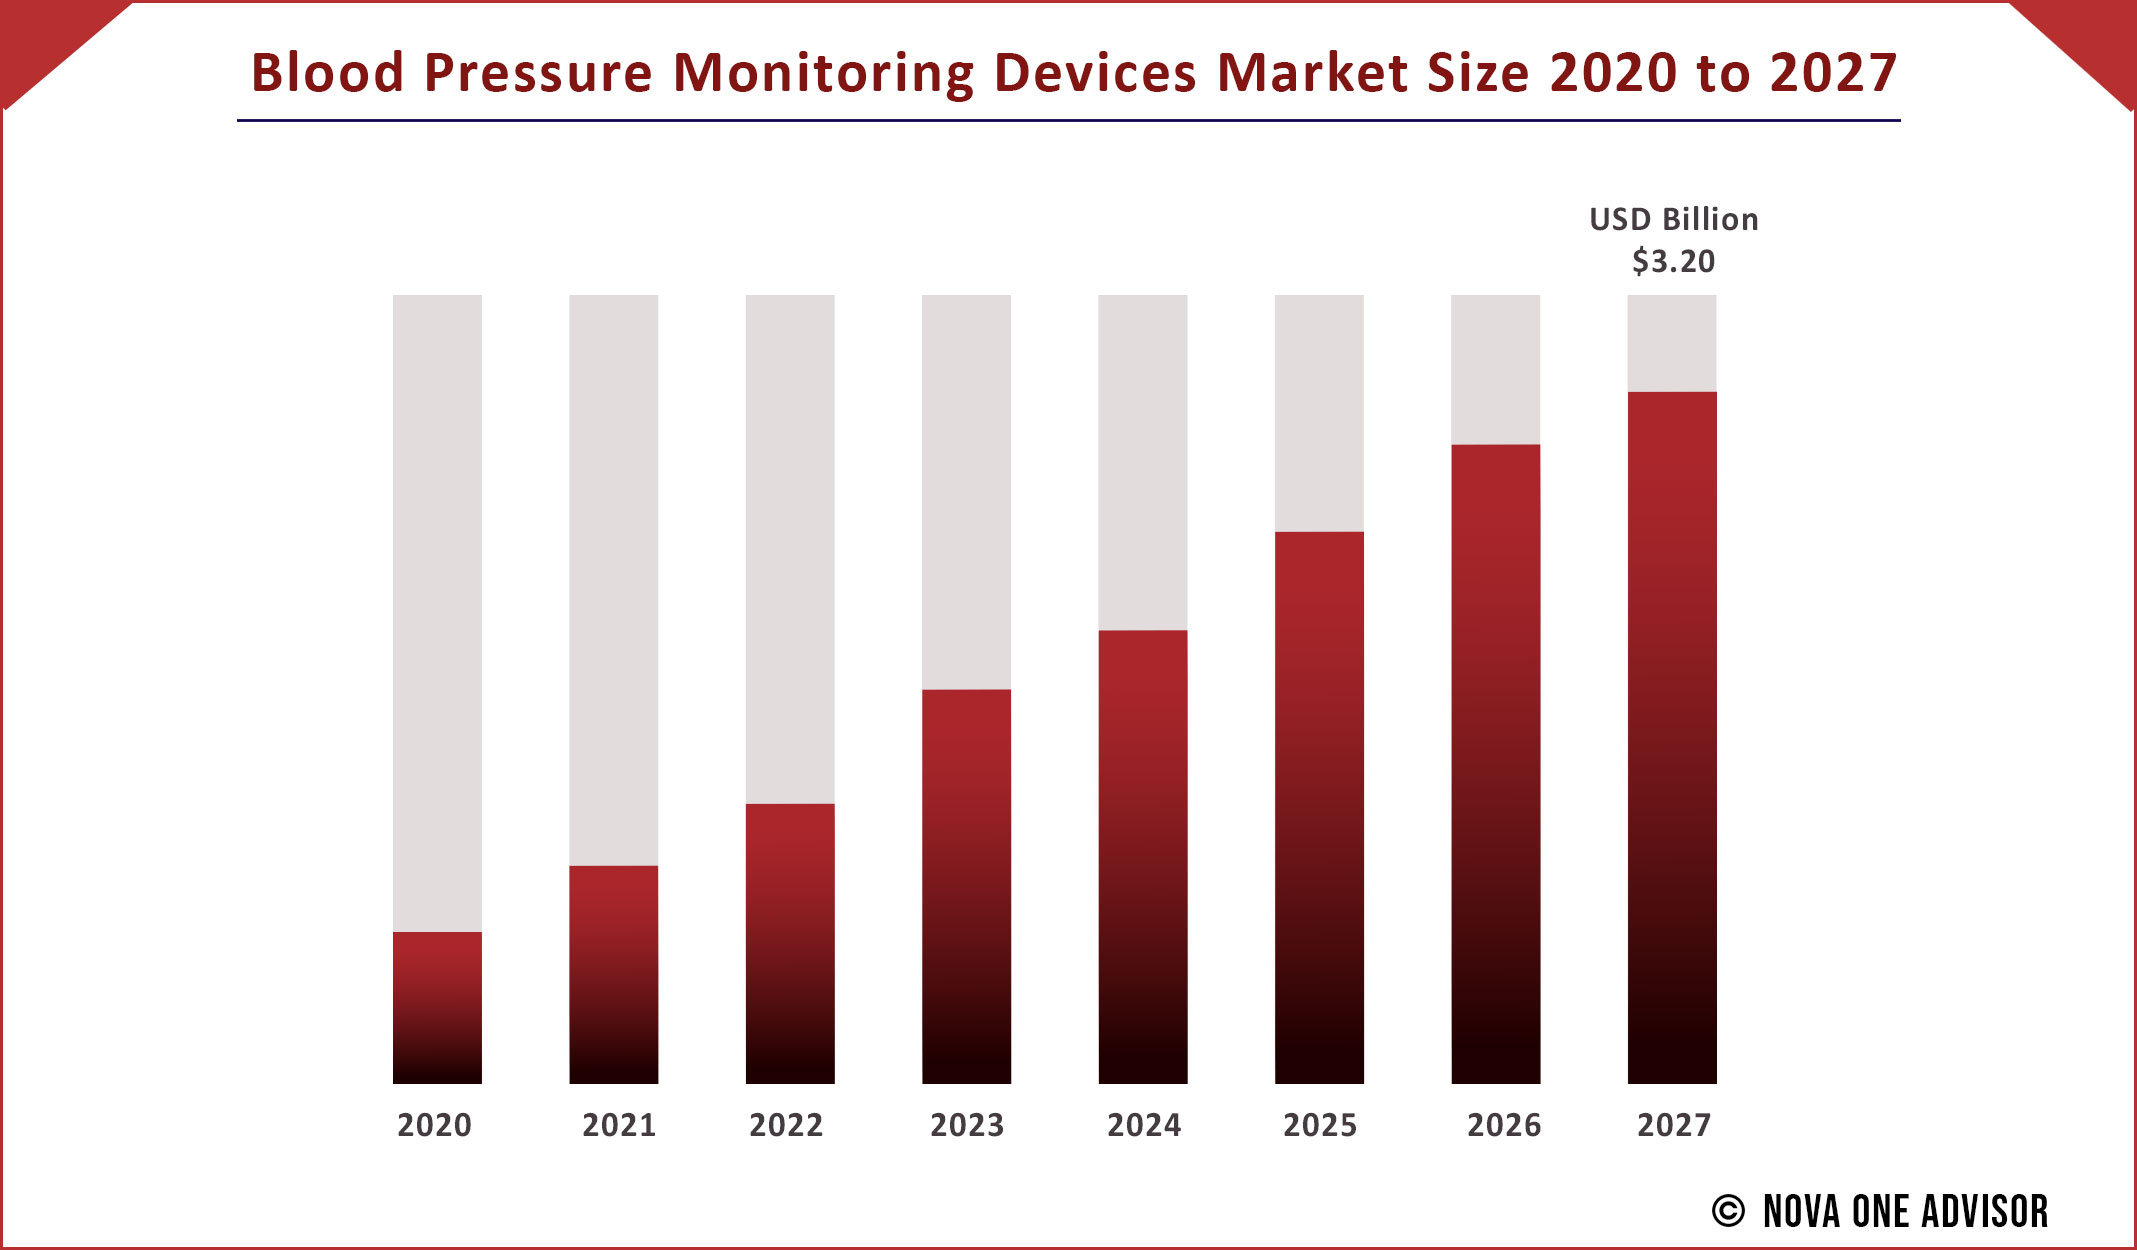 Blood Pressure Monitoring Devices Market Size 2020 to 2027